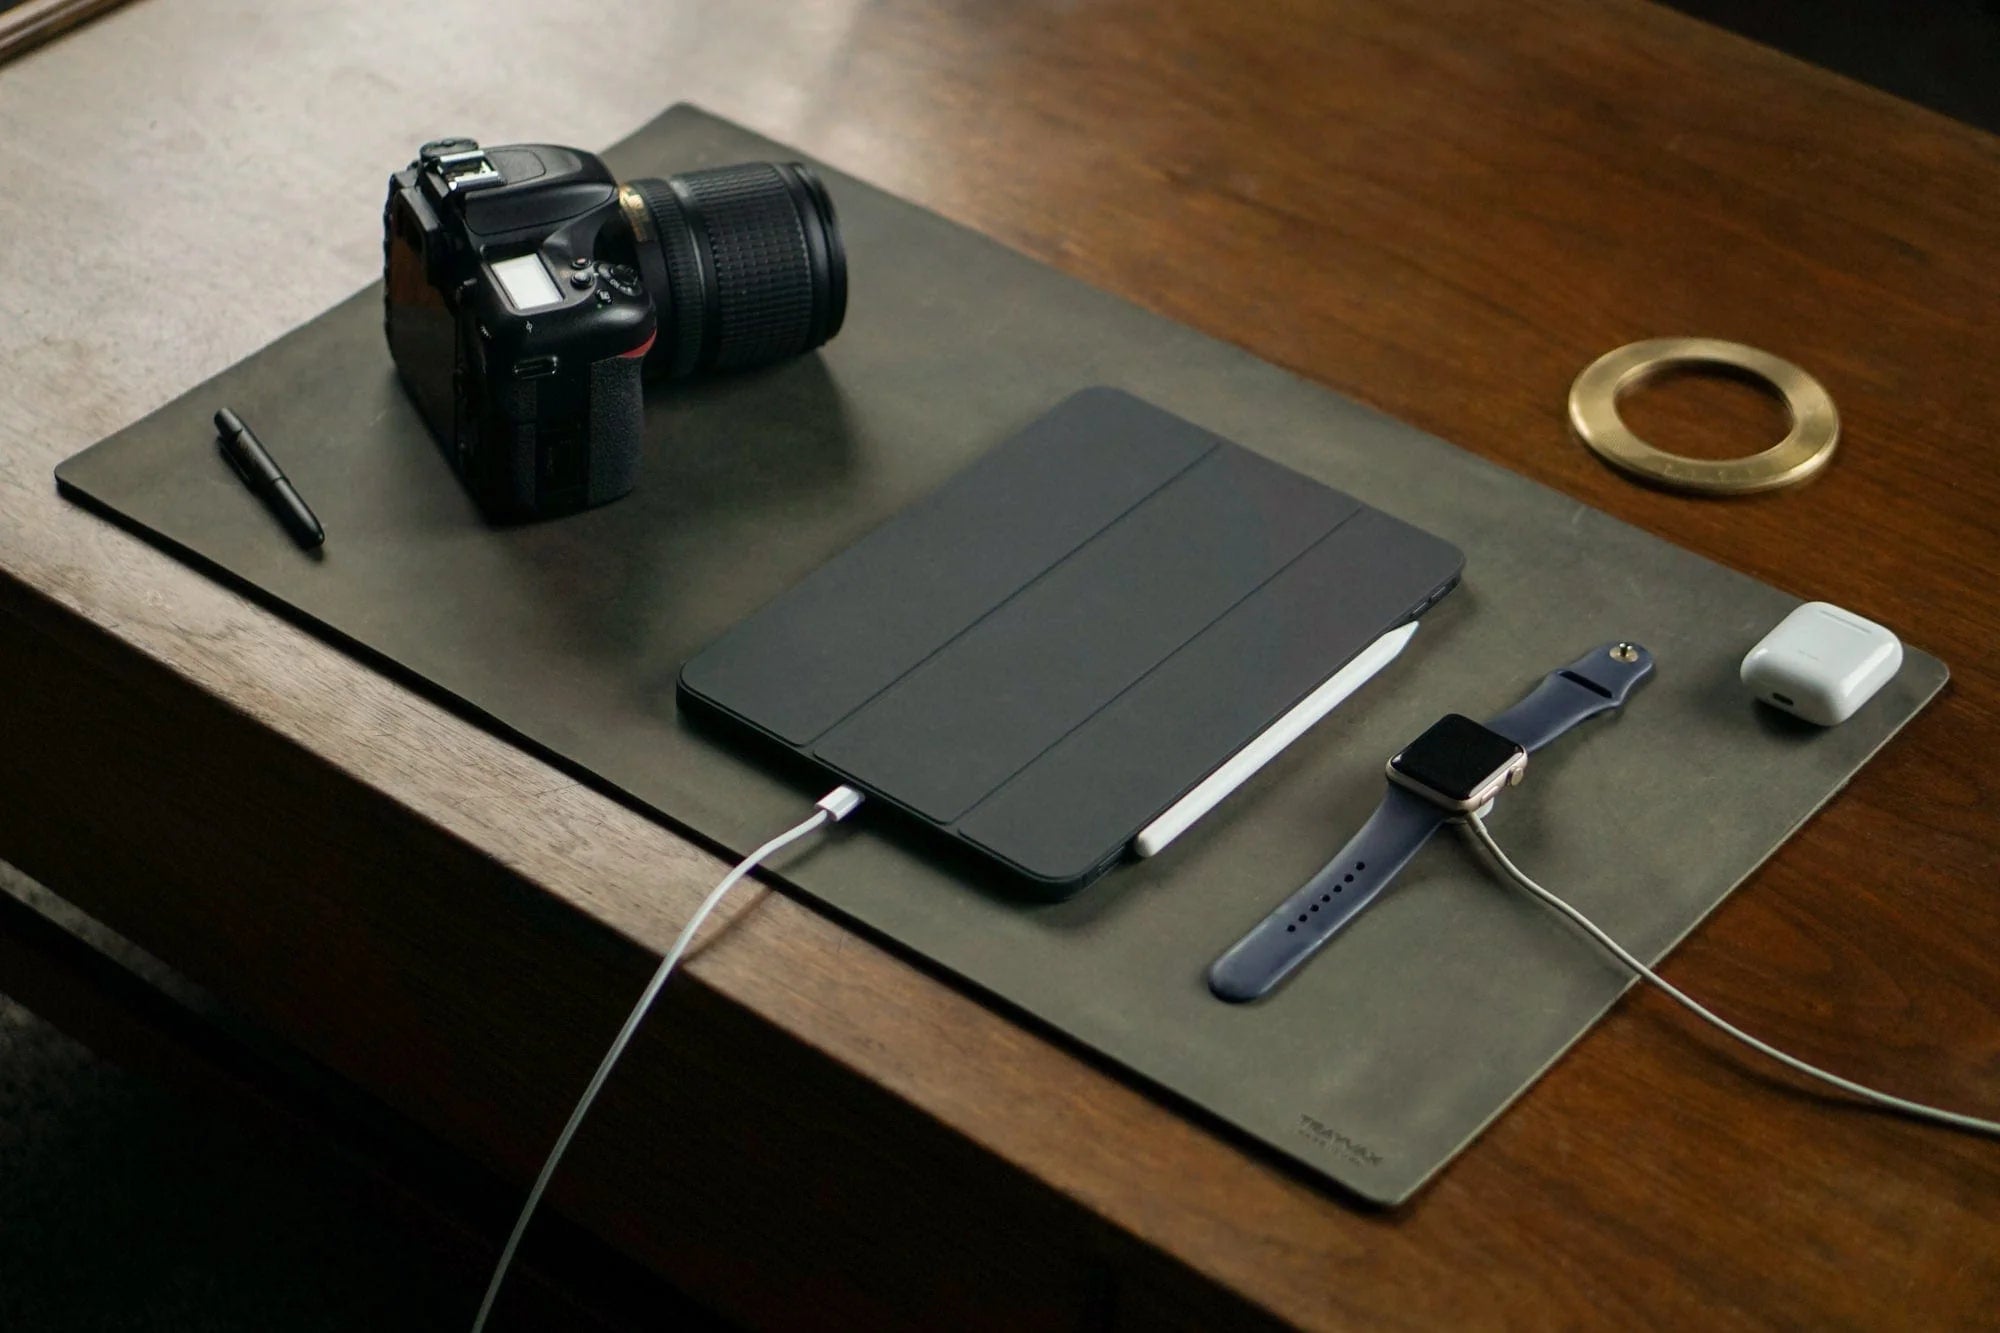 Leather Desk Mat With Ipad, Apple Watch, DSLR, and Airpods On Display